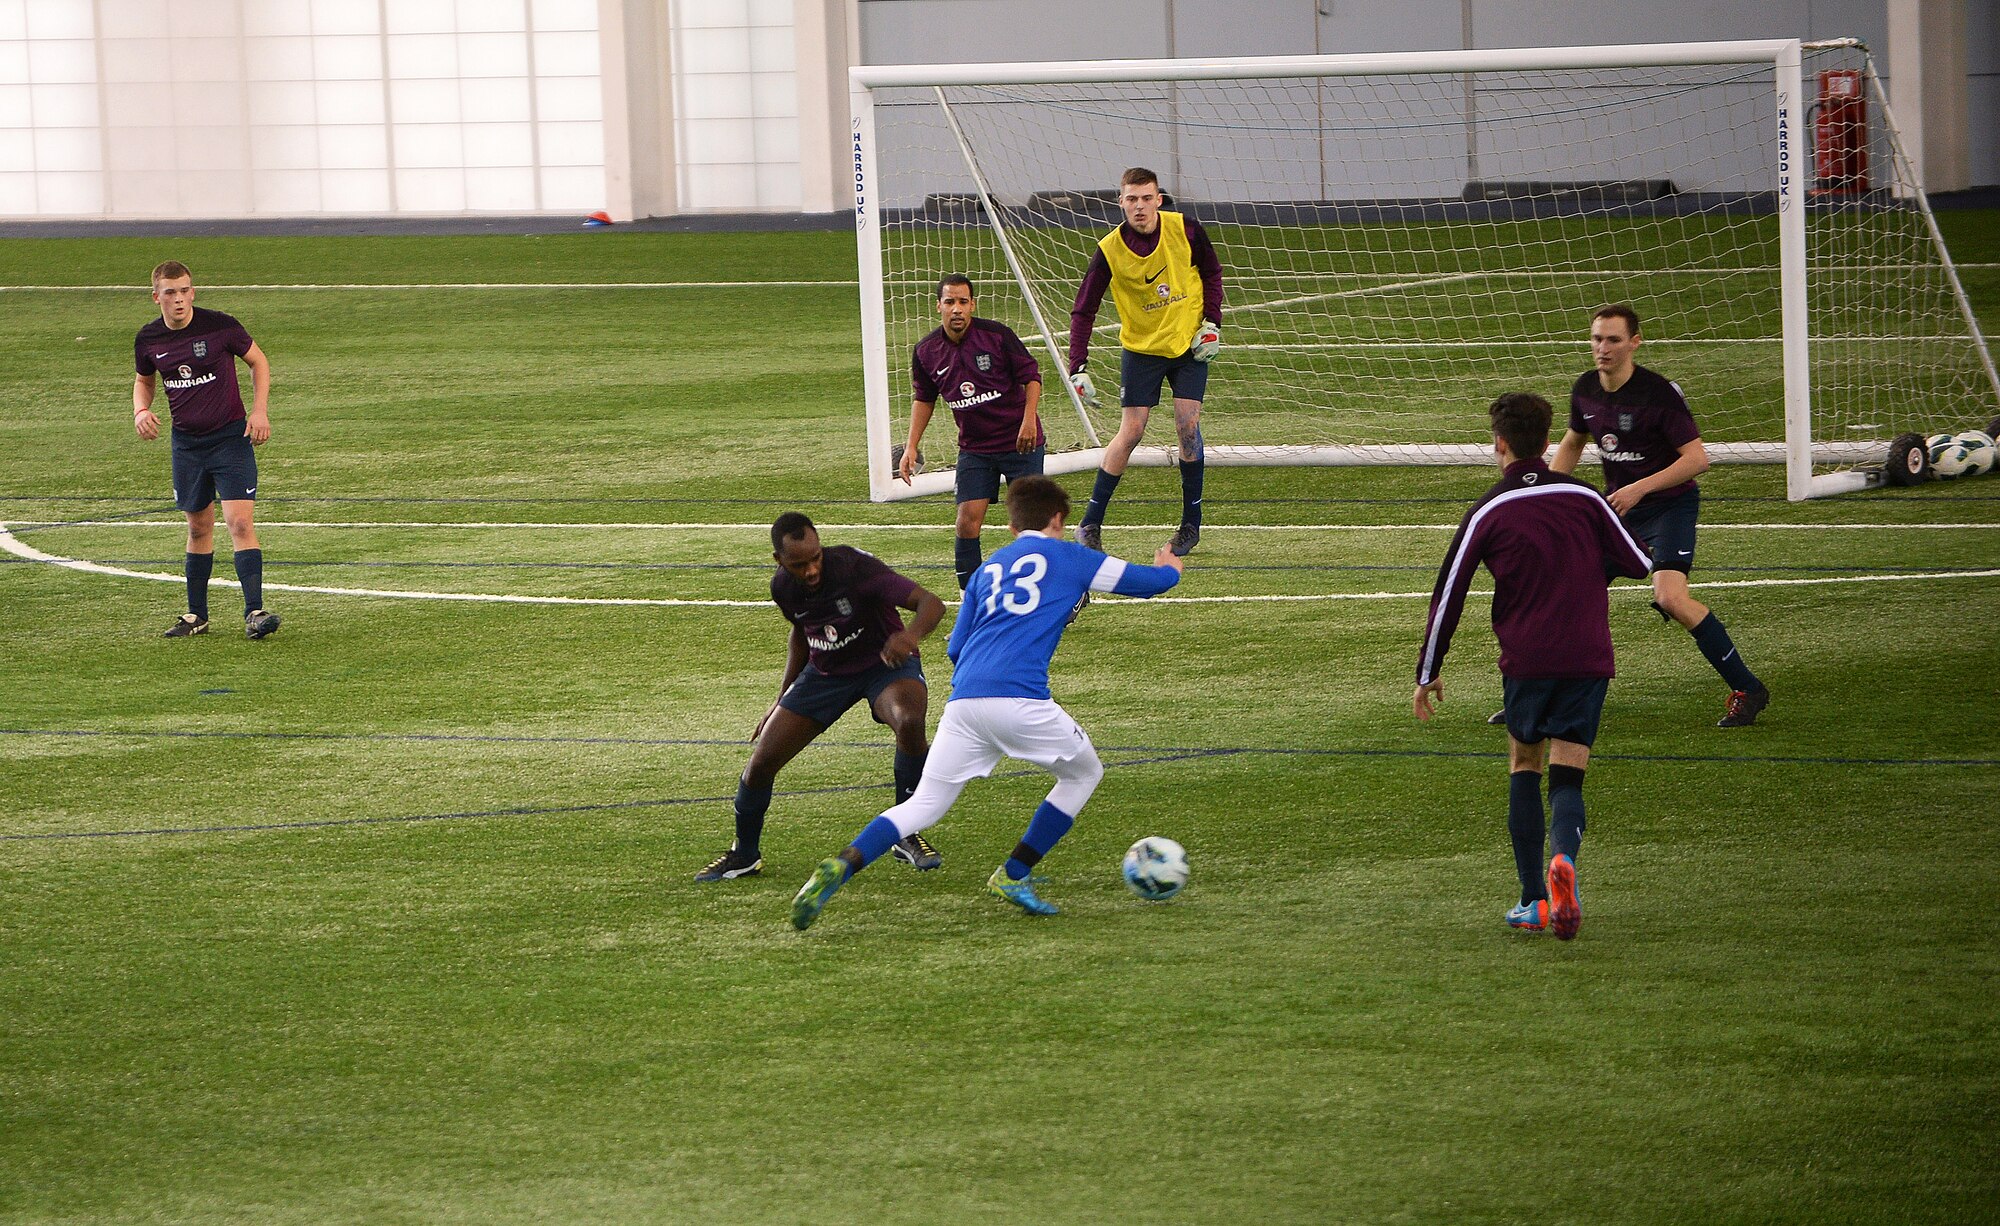 Christopher Miles, a midfielder for the Liberty Football Club, advances past defenders during a match against the world-ranked England Cerebral Palsy team at St. George’s Park, England, Jan. 25, 2015. The England CP team is currently training for the 2015 CP World Cup, which will be hosted by England at St. George’s Park. (U.S. Air Force photo by Staff Sgt. Emerson Nuñez/Released)